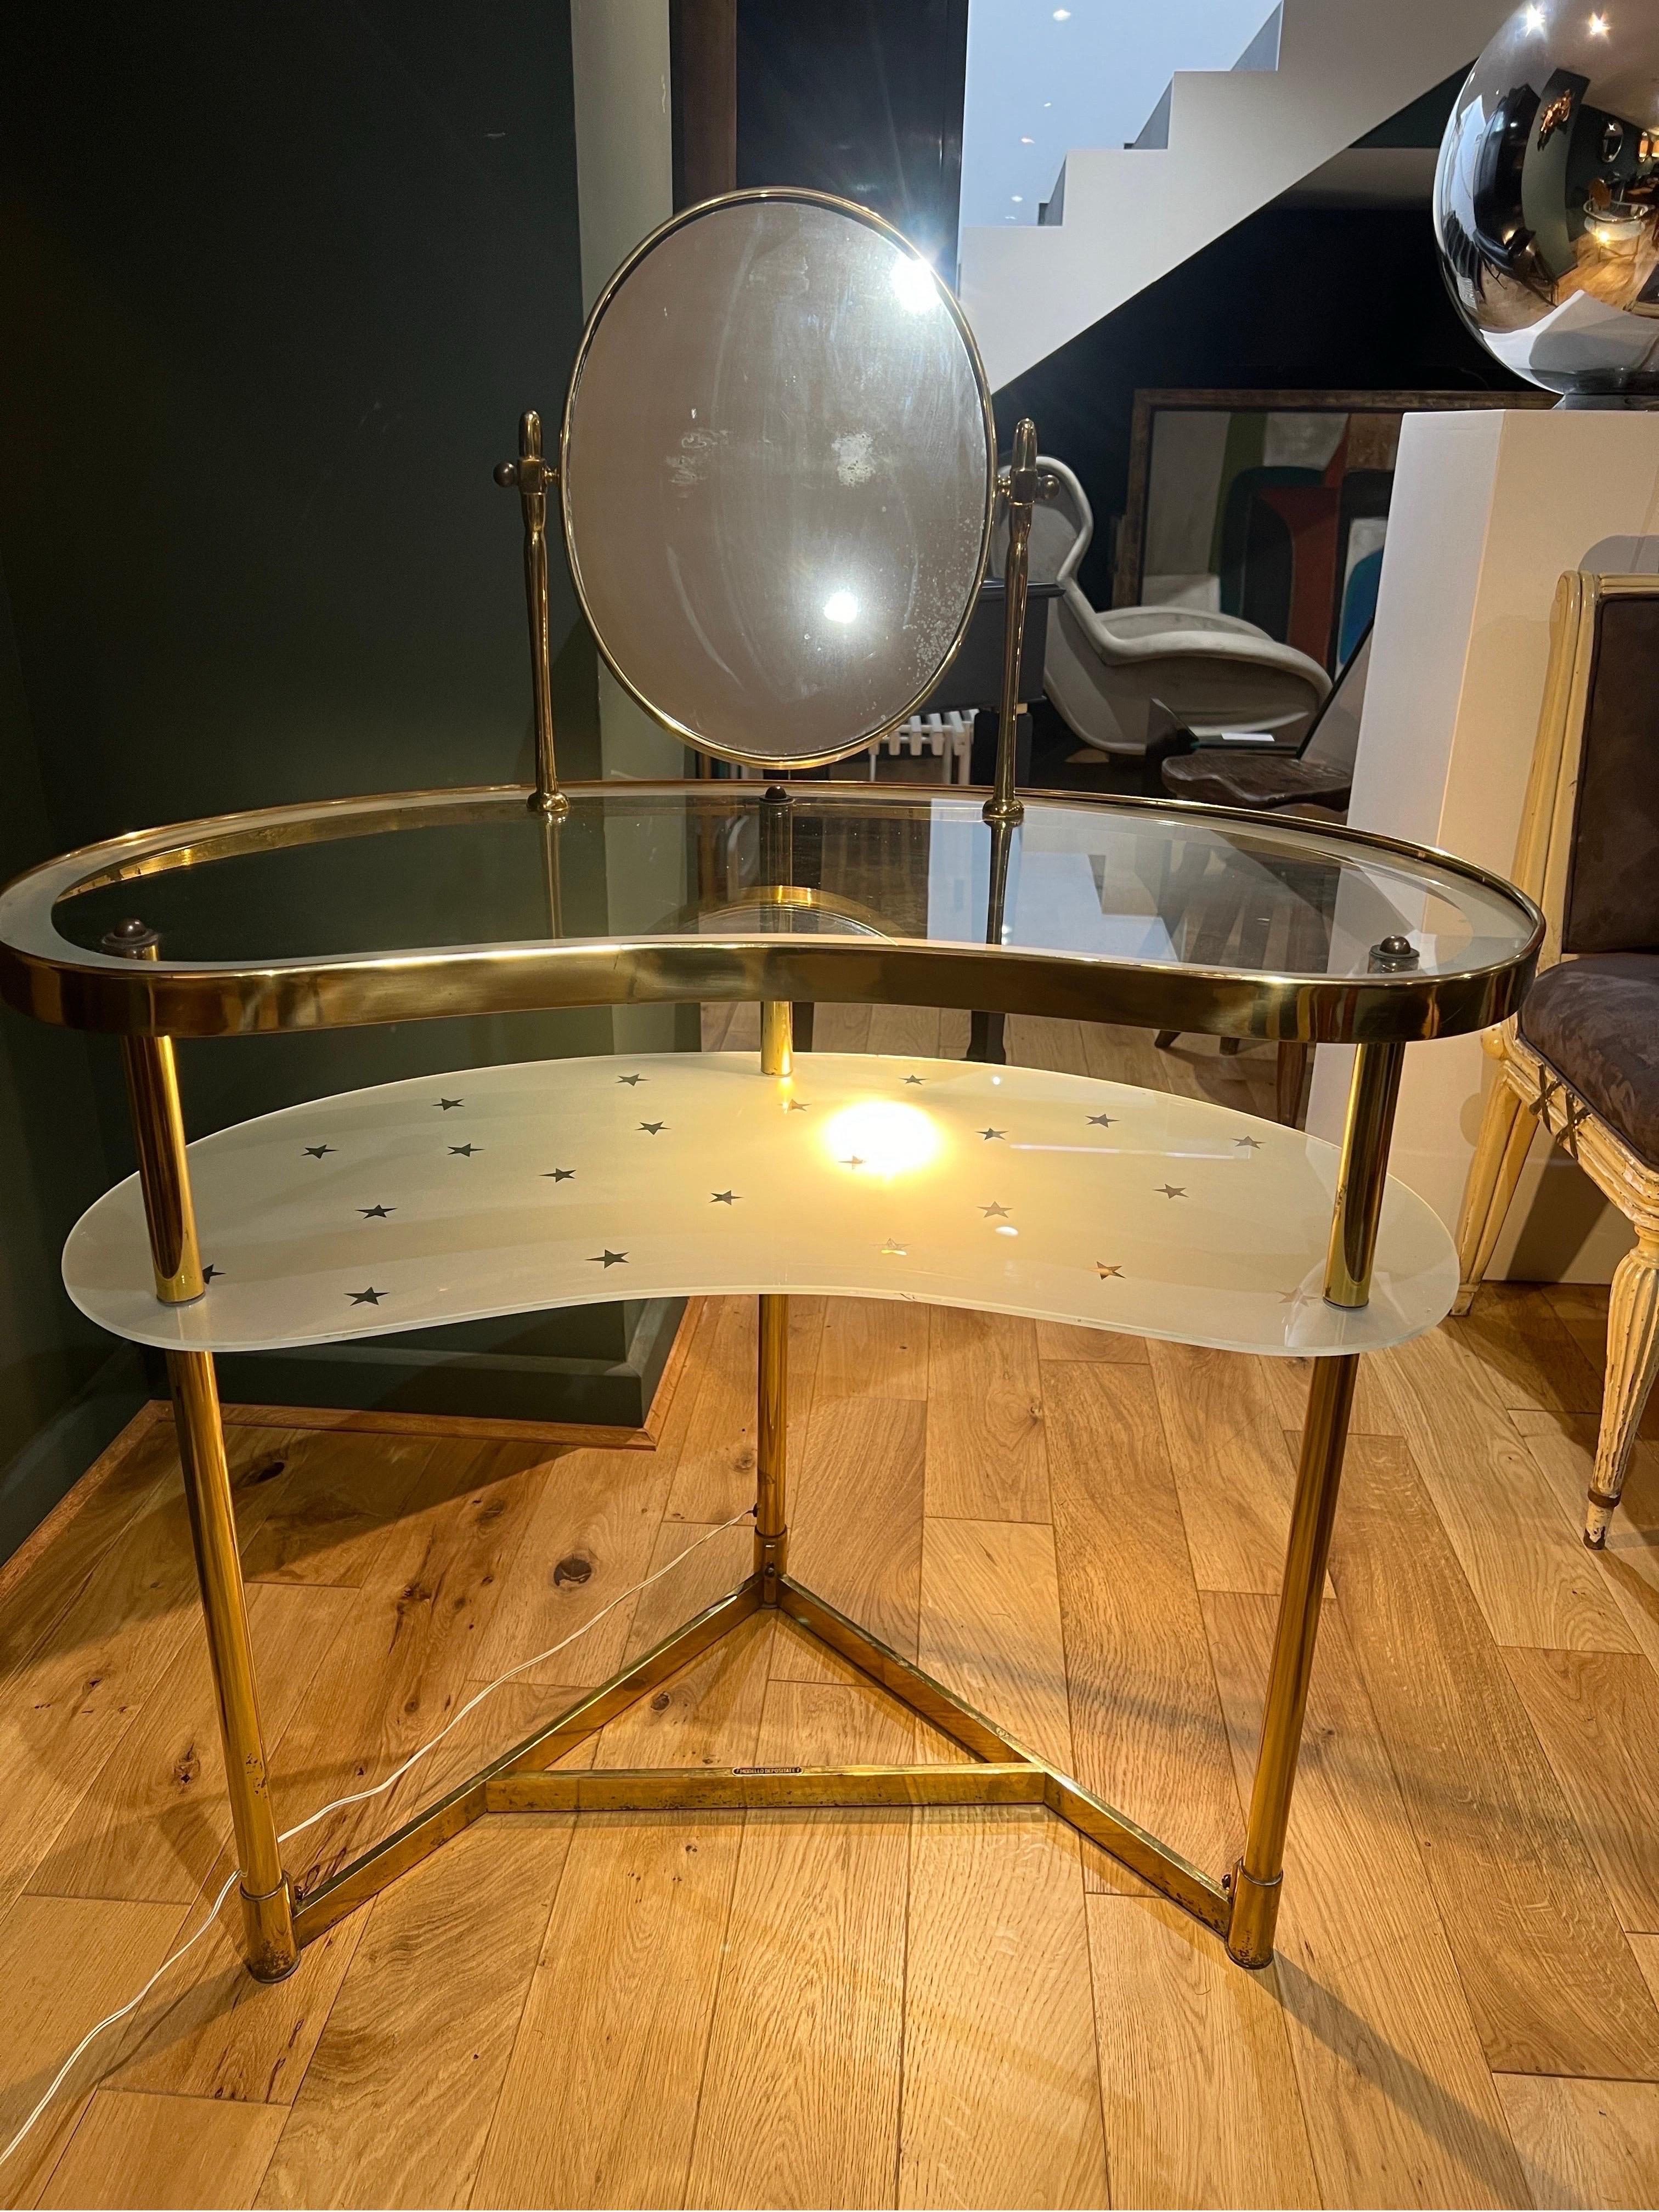 A Luigi Brusotti brass and glass kidney shaped vanity table . The table is composed of a swivel brass framed mirror mounted on a transparent glass top tier and frosted lower tier with etched stars decoration. 
There’s a light fixture under the